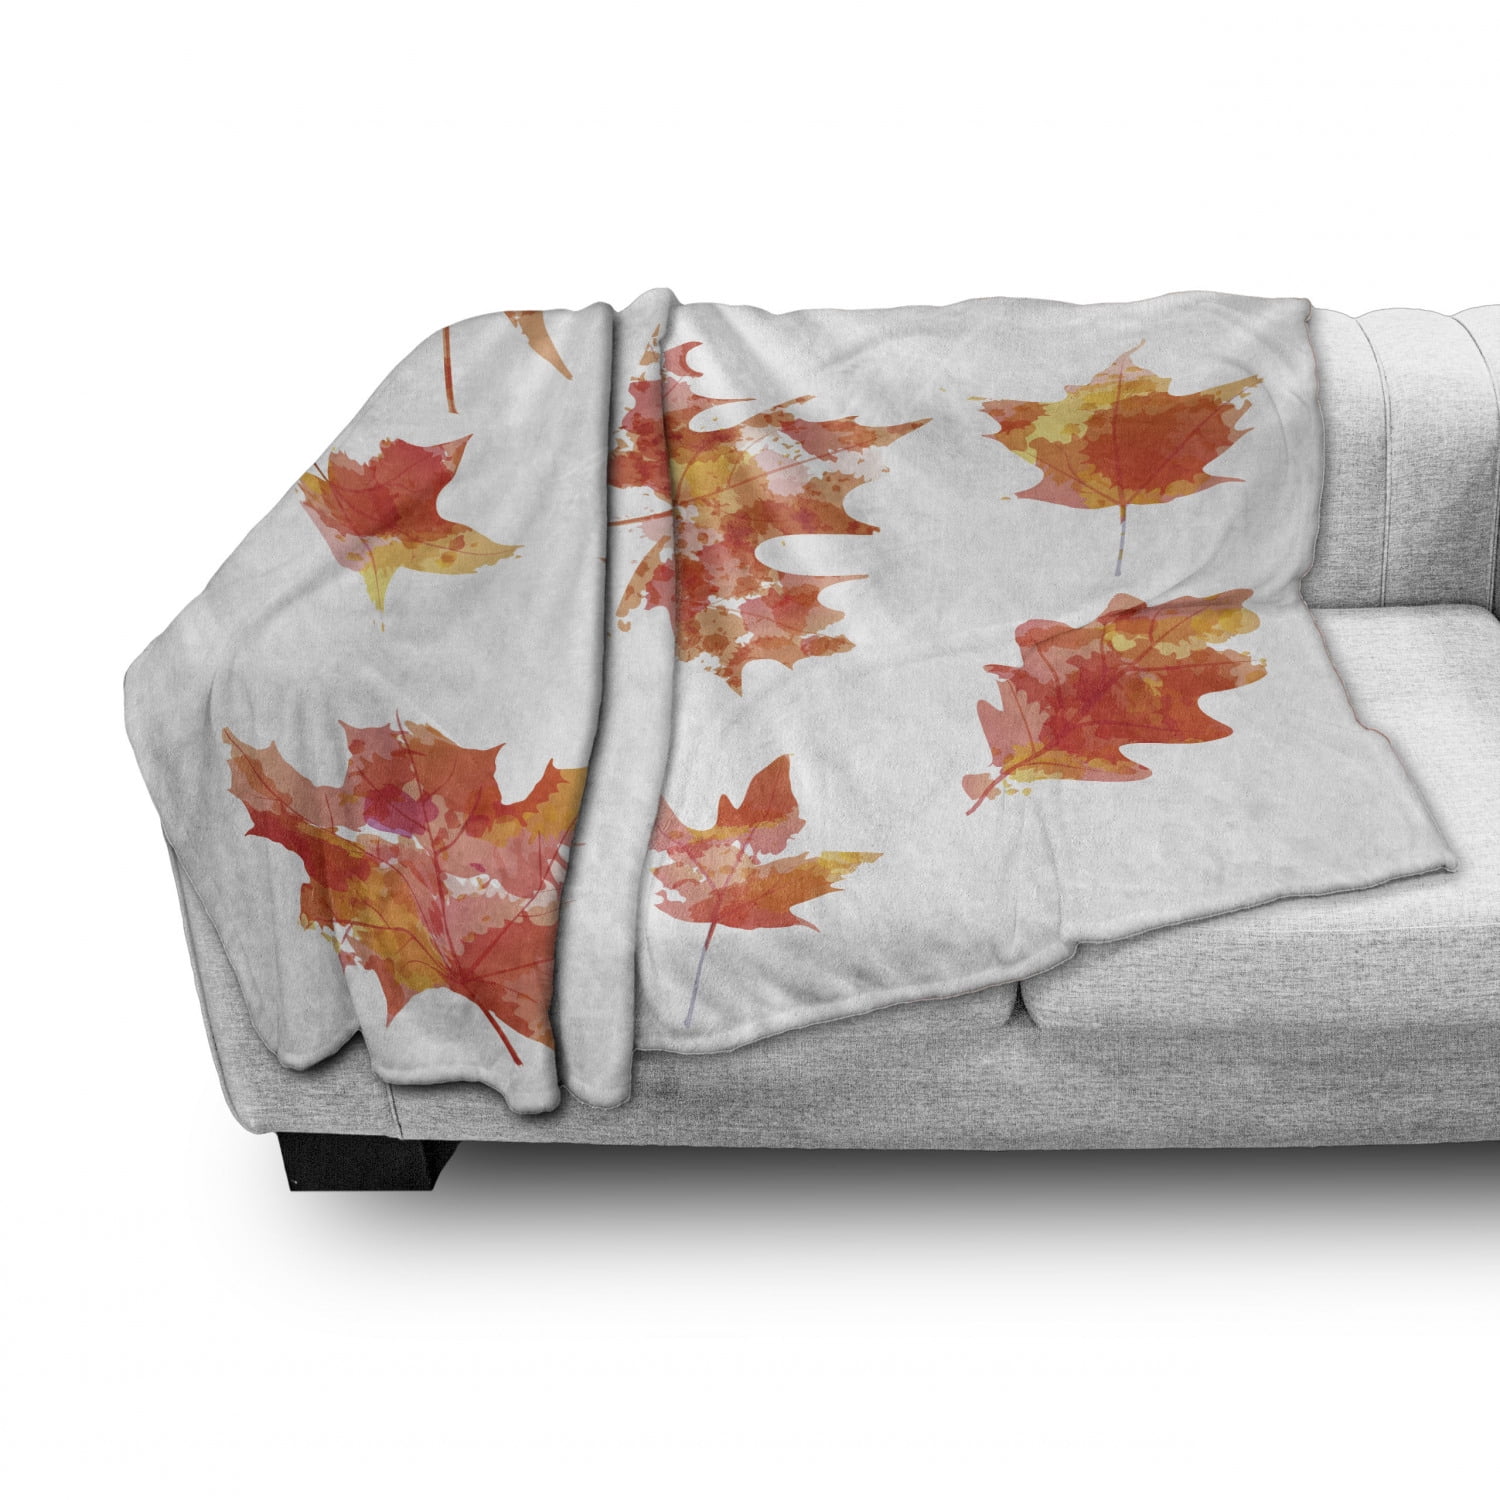 50 x 70 Burnt Orange Orange Cozy Plush for Indoor and Outdoor Use Ambesonne Leaves Soft Flannel Fleece Throw Blanket Watercolor Effect Autumn Season Maple Leaf Pattern Canadian Foliage 